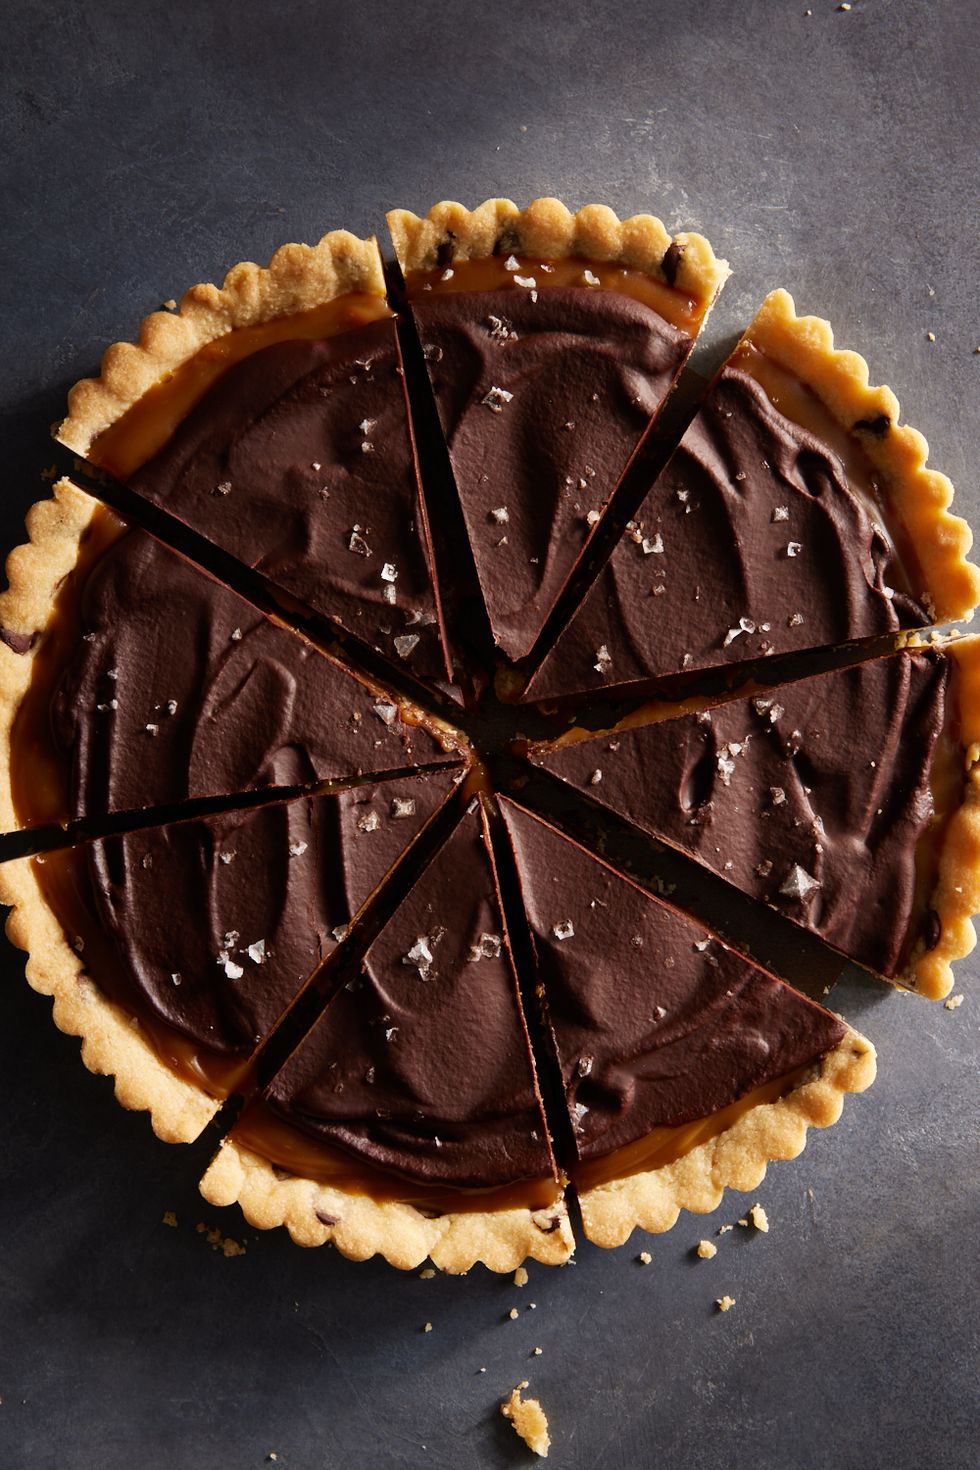 tart with chocolate chip cookie crust, filled with caramel and topped with chocolate ganache